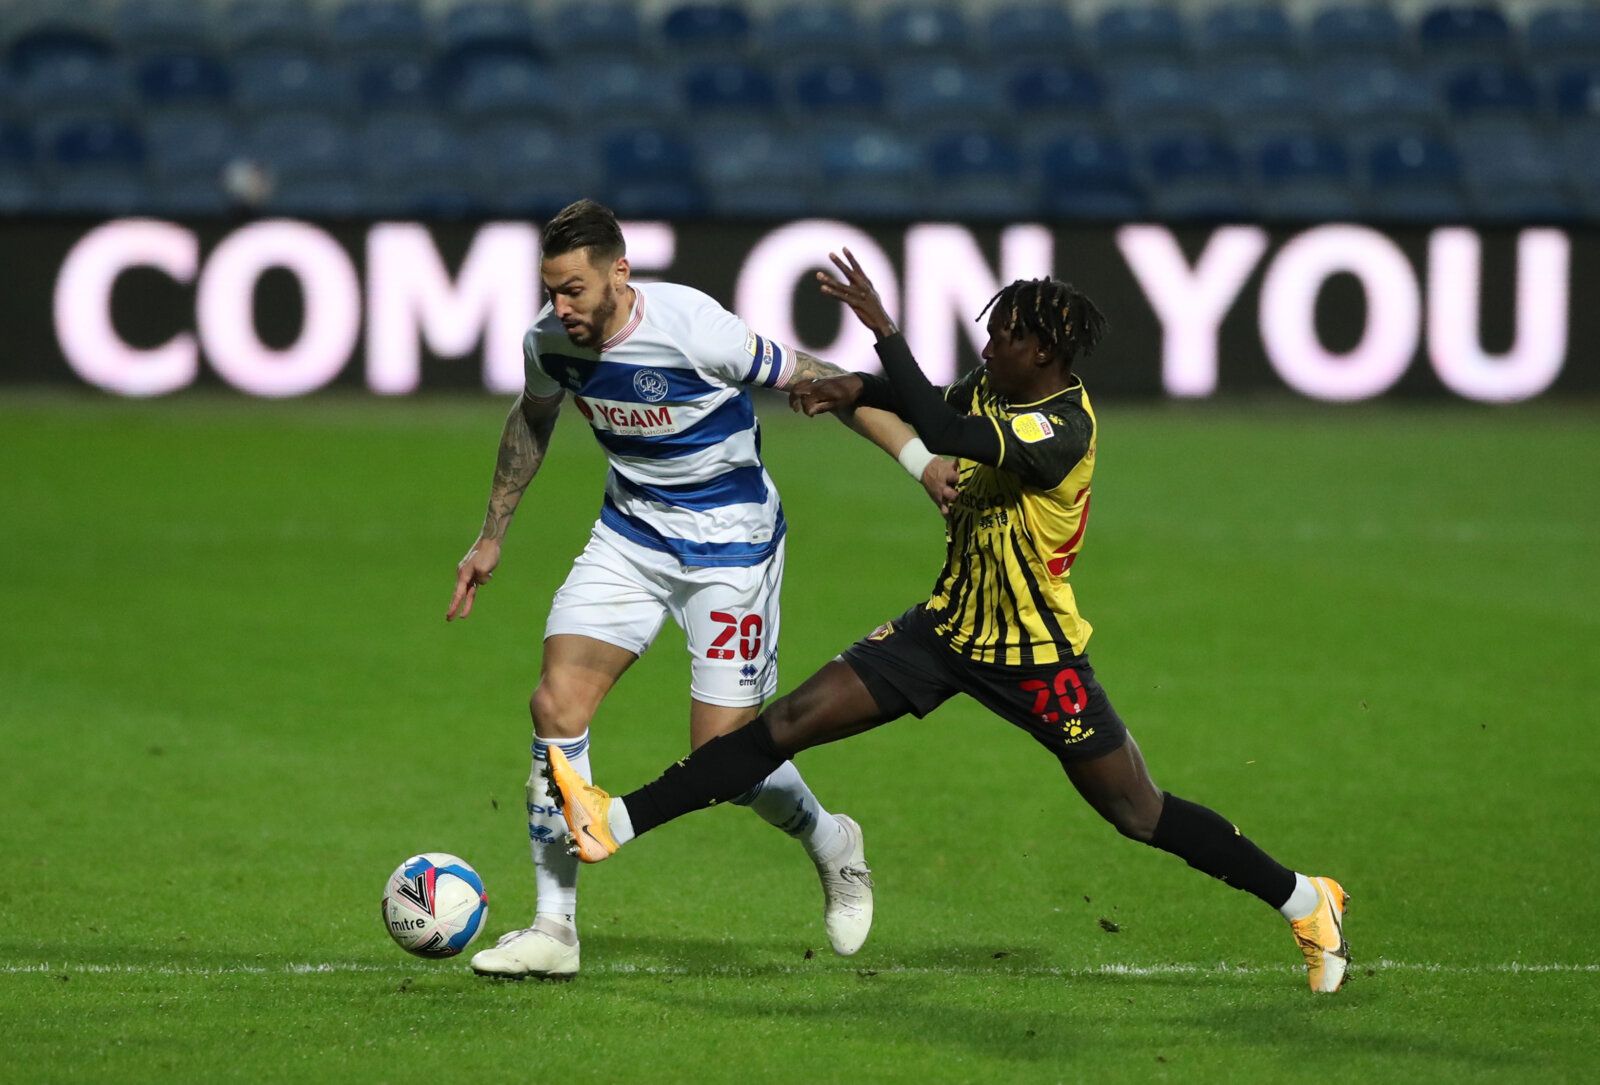 Soccer Football - Championship - Queens Park Rangers v Watford - Loftus Road, London, Britain - November 21, 2020 QPR's Geoff Cameron in action with Watford's Domingos Quina Action Images/Peter Cziborra EDITORIAL USE ONLY. No use with unauthorized audio, video, data, fixture lists, club/league logos or 'live' services. Online in-match use limited to 75 images, no video emulation. No use in betting, games or single club /league/player publications.  Please contact your account representative for 